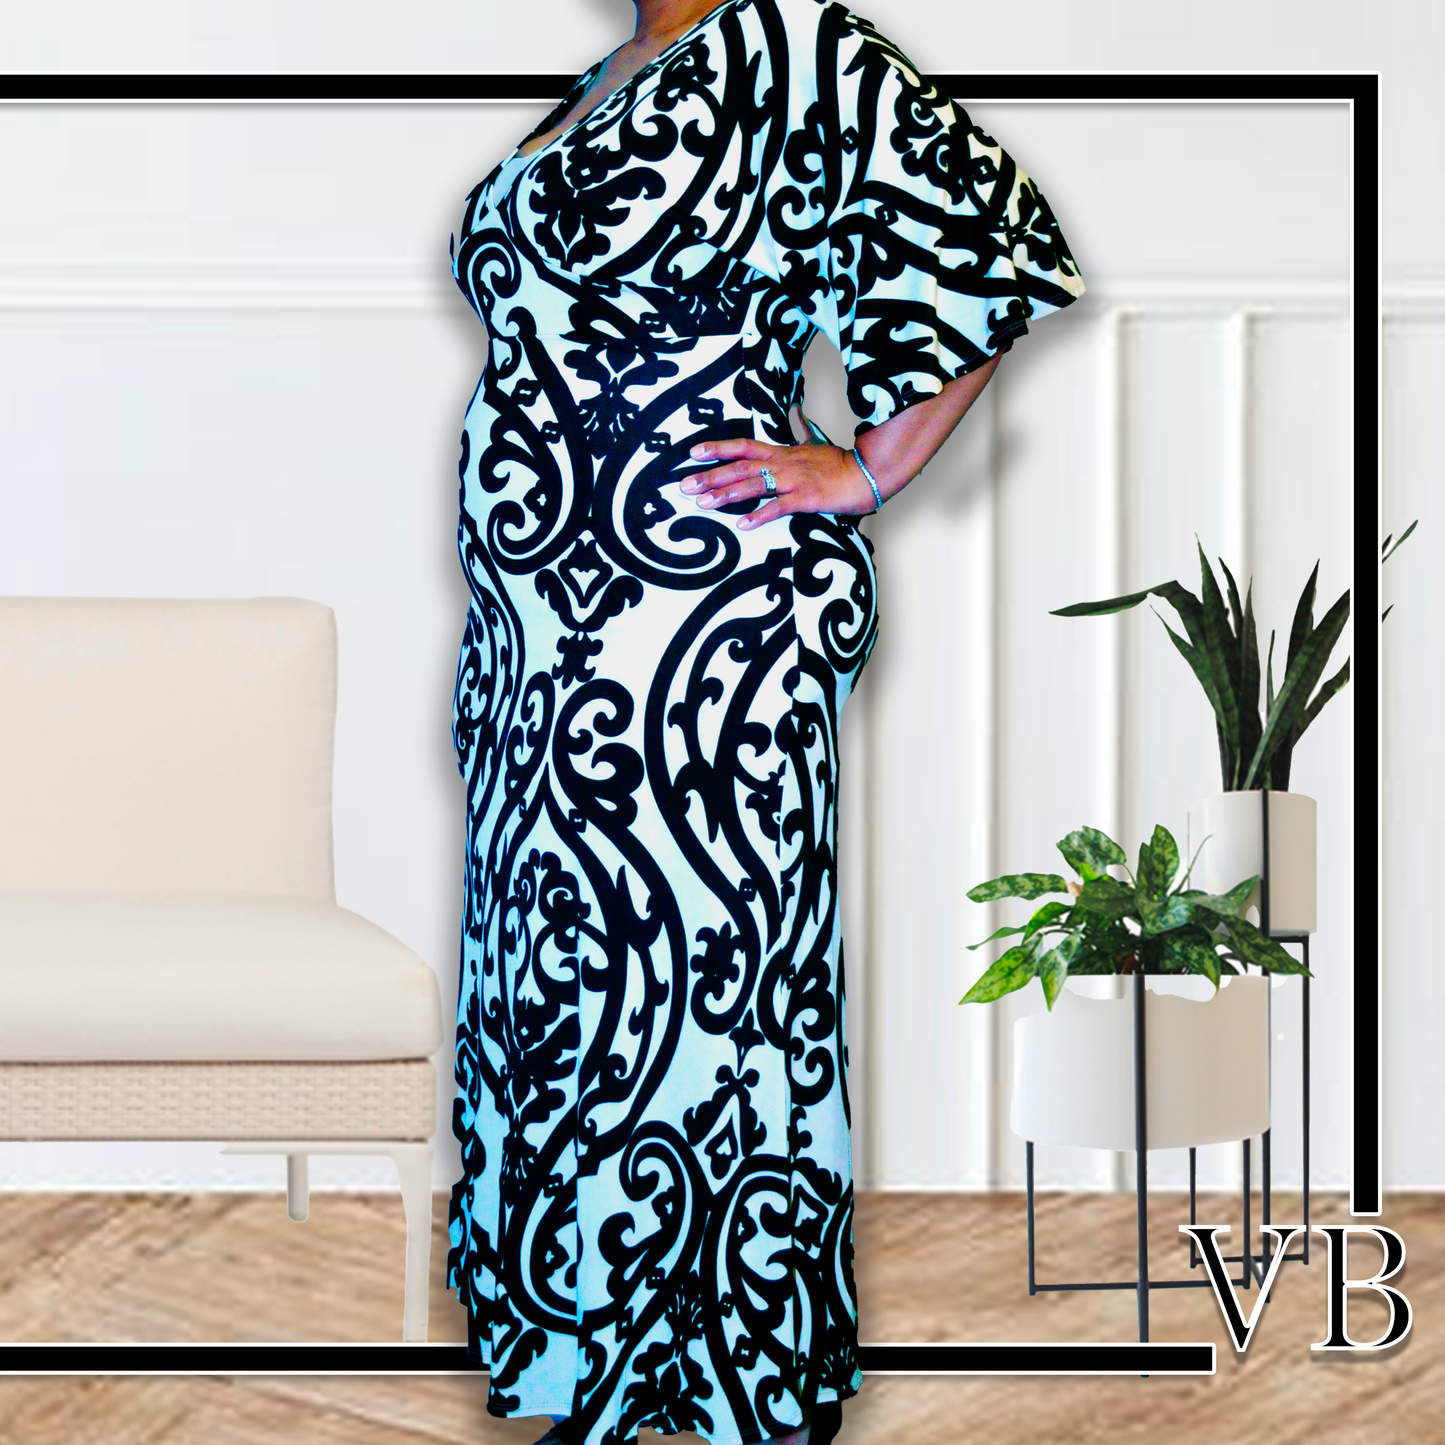 The Avery is our black and tan maxi dress with a deep v-neckline.  It has a stretchy waist with flowy 3/4 bell sleeves.  Made in the U.S.A. of knit materials that are 96% polyester and 4% spandex.  Thye Avery feels good on the skin and will lay great over your curves.  You can take on a long day in style or dress it up.  Either way this dress will fit your needs.  The dress runs slightly large but will not disappoint.  The Avery maxi dress looks great on all body types.